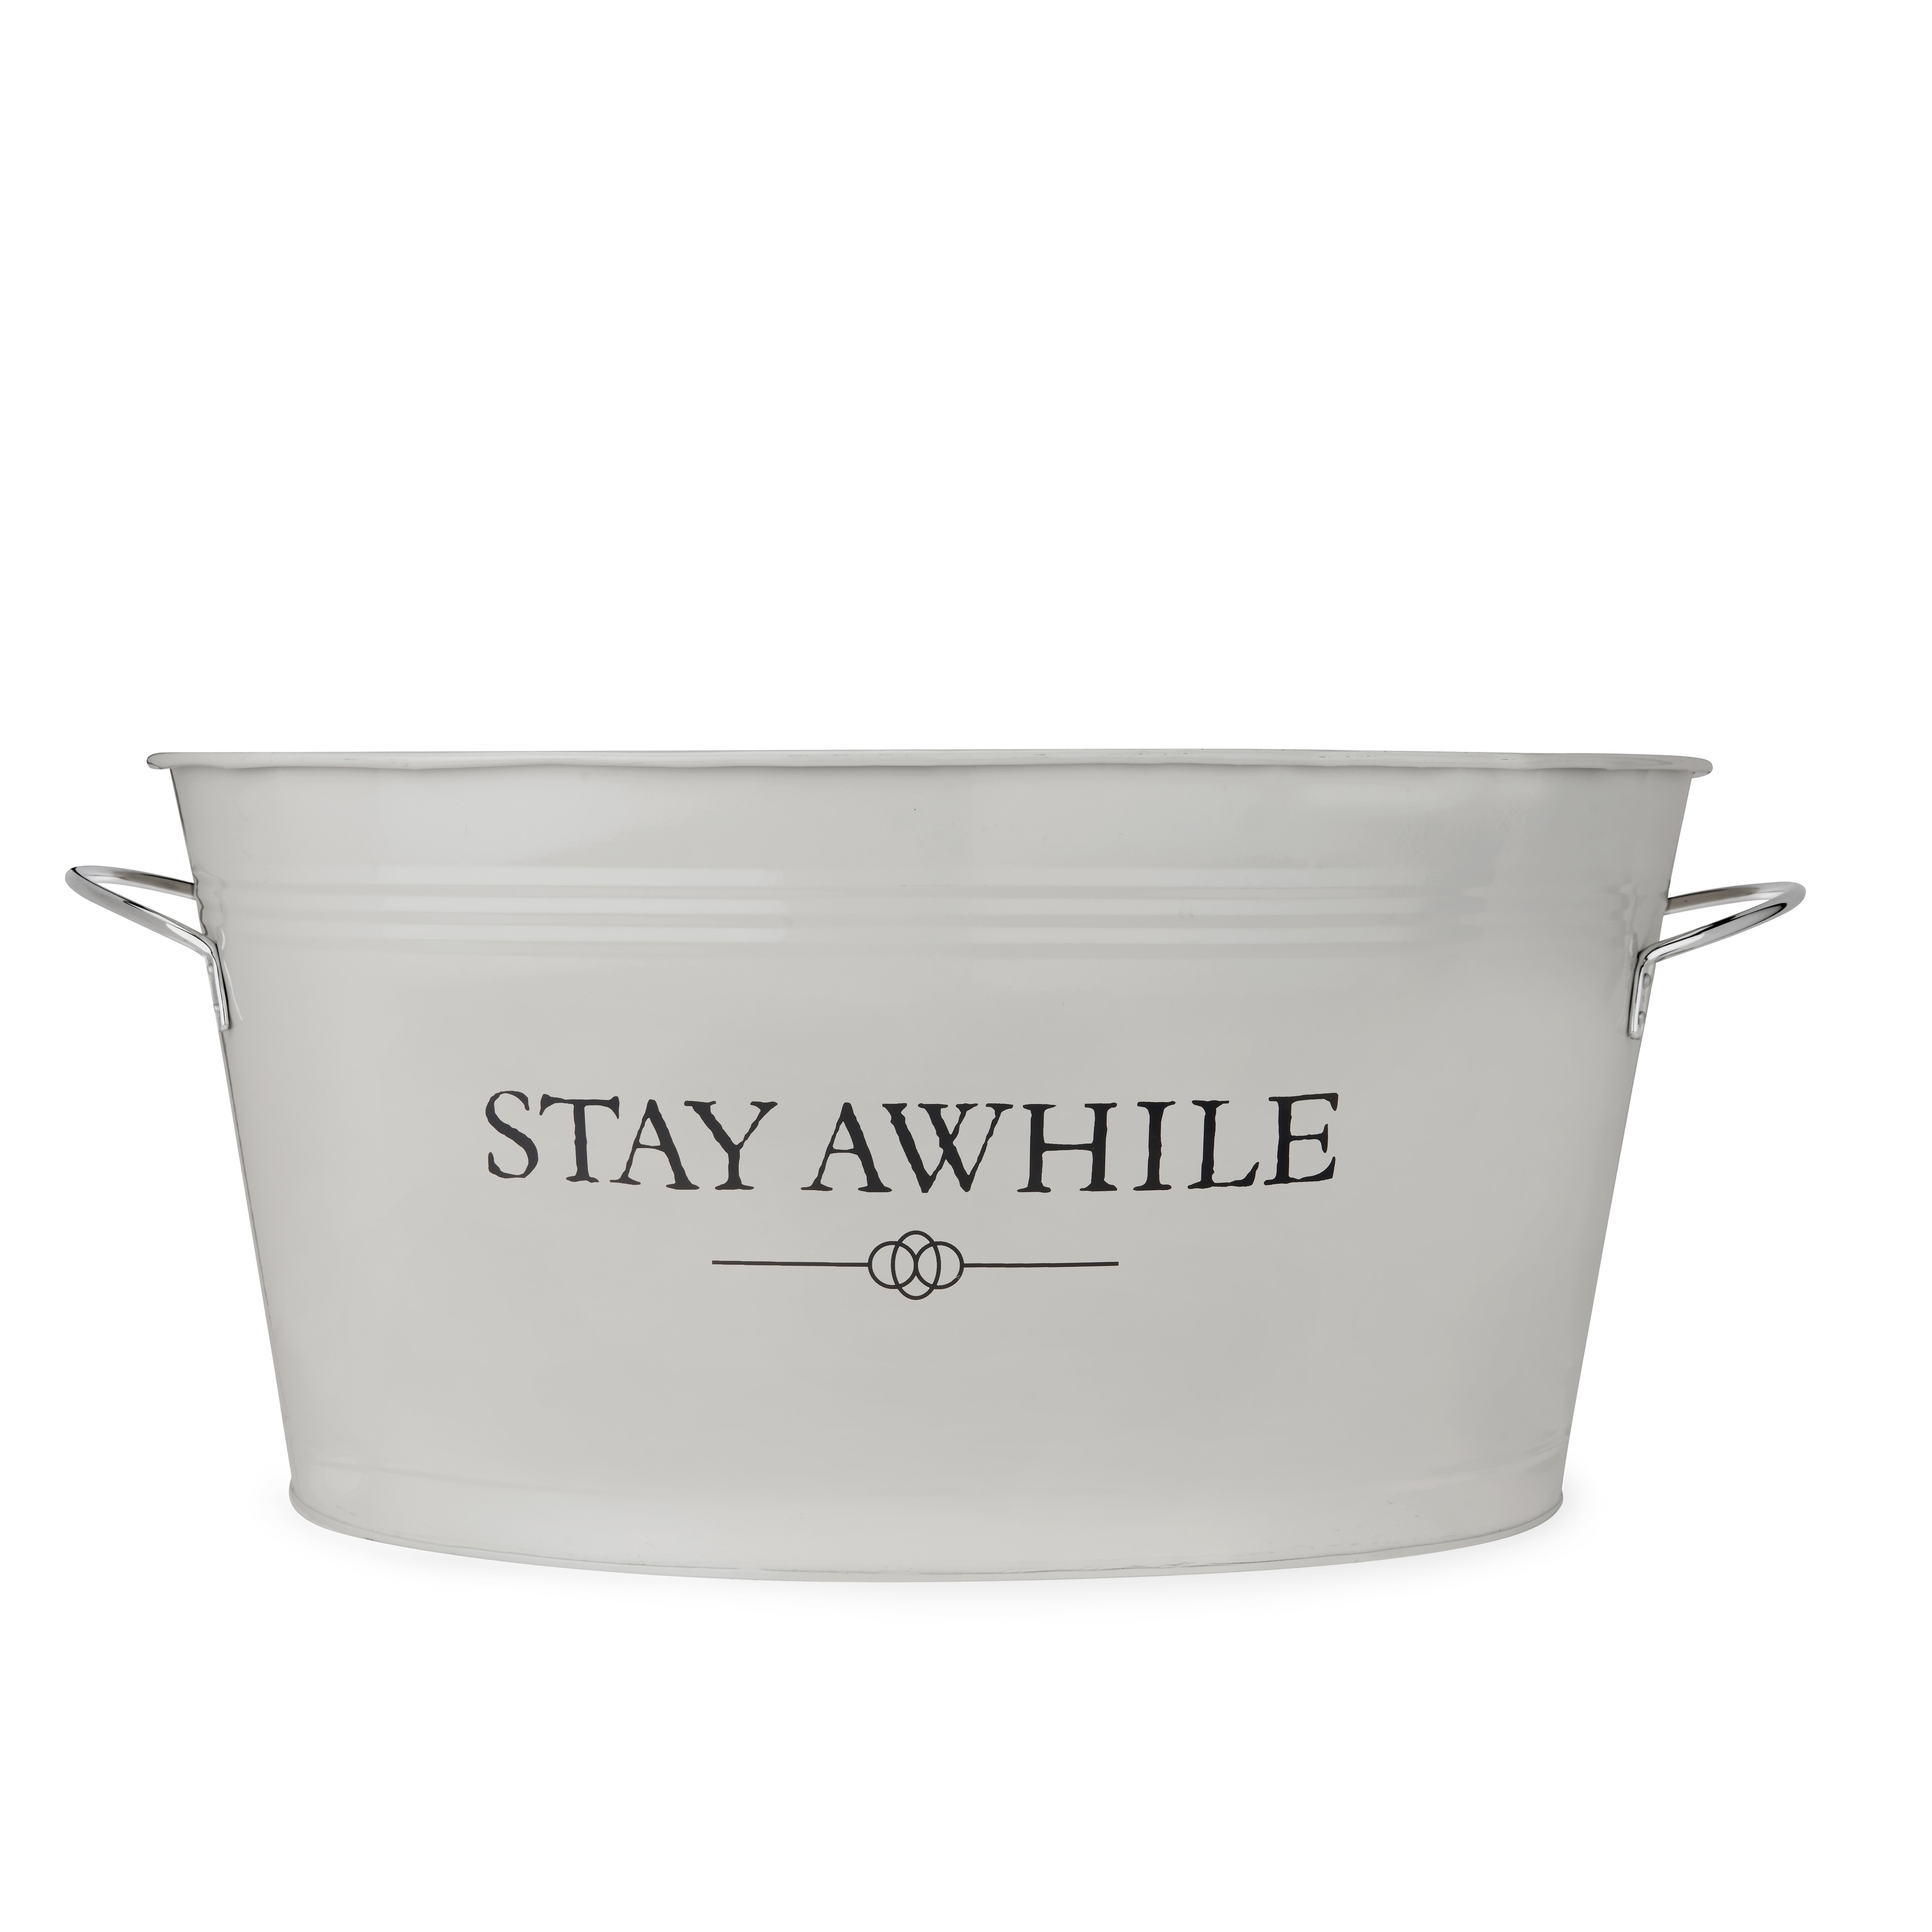 https://ak1.ostkcdn.com/images/products/is/images/direct/821bfa1eb0ae359e5329f2c5adc98e468e100e56/Twine-Stay-Awhile-White-Galvanized-Ice-Bucket-and-Metal-Tub%2C-6.3-Gallon-Capacity.jpg